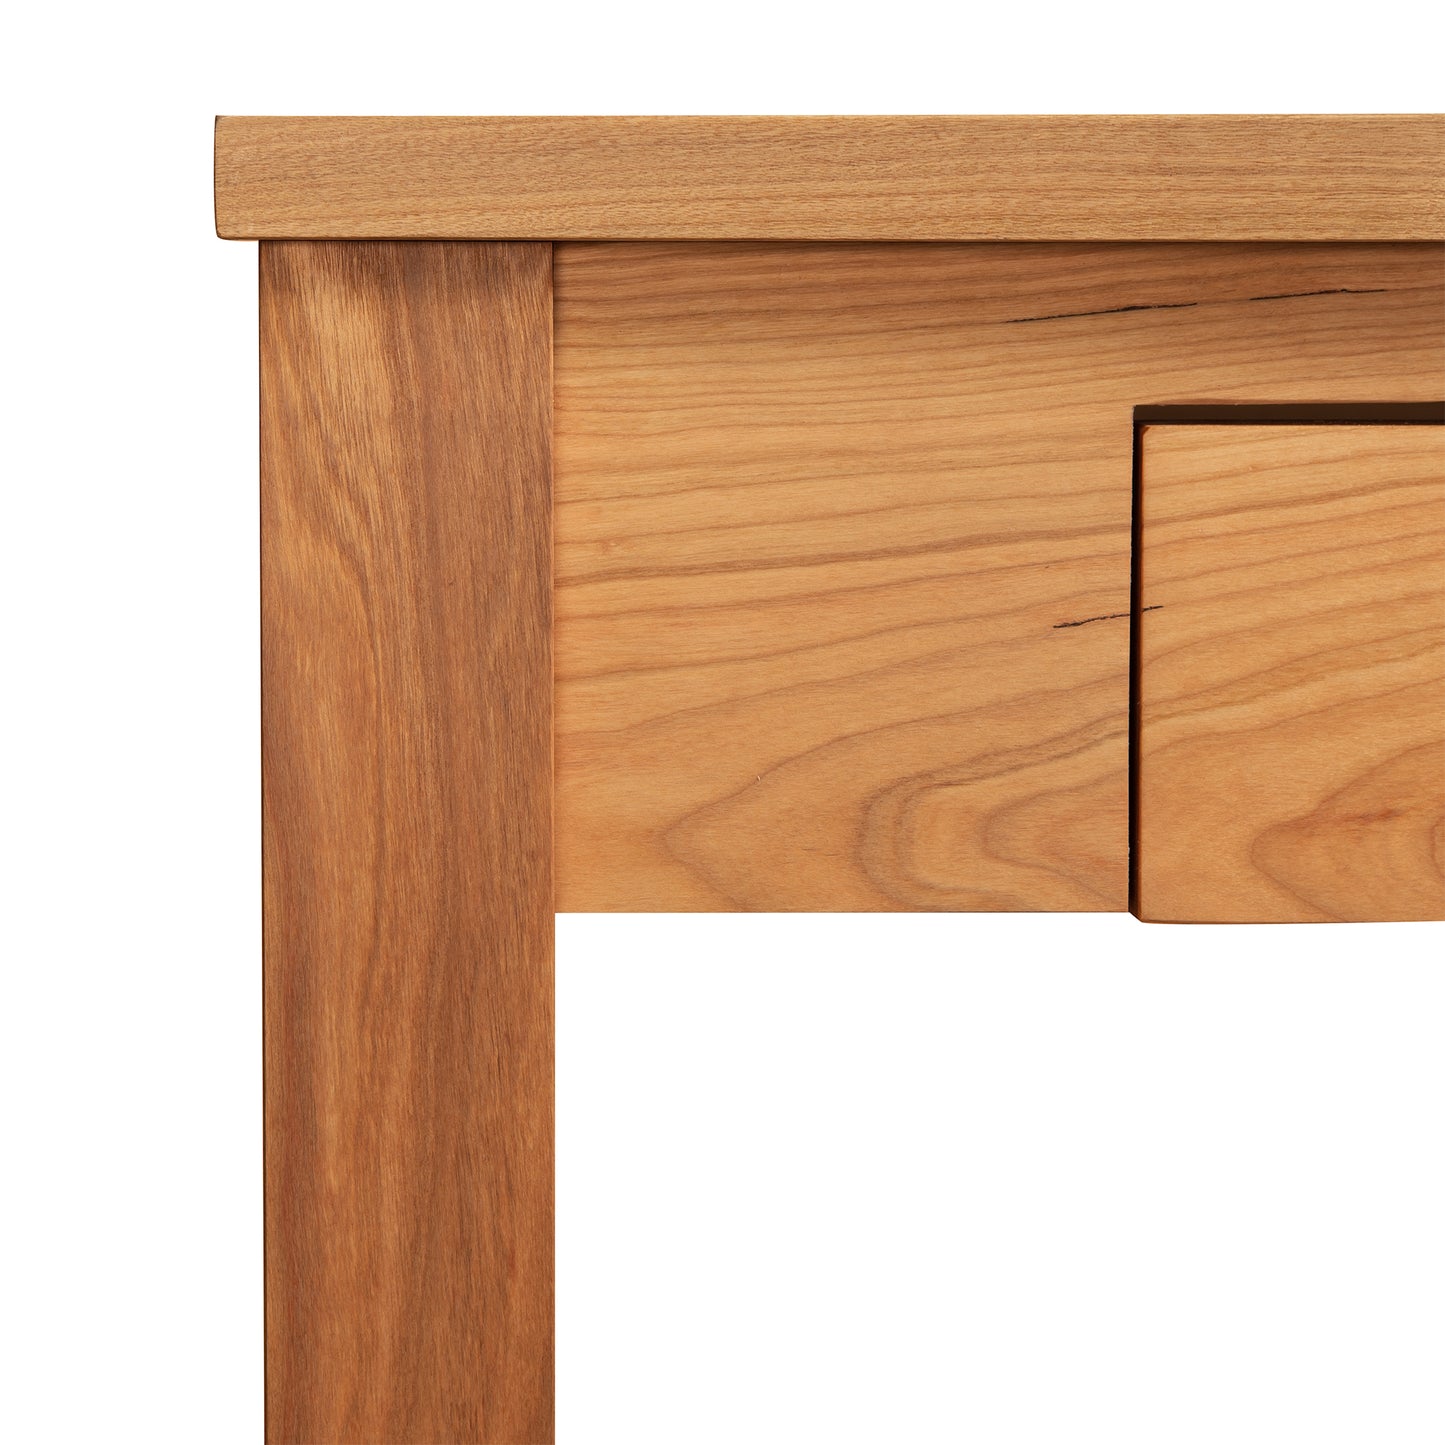 Close-up of a Maple Corner Woodworks Ryegate Writing Desk corner showing grain details with a flush drawer and solid wood construction.